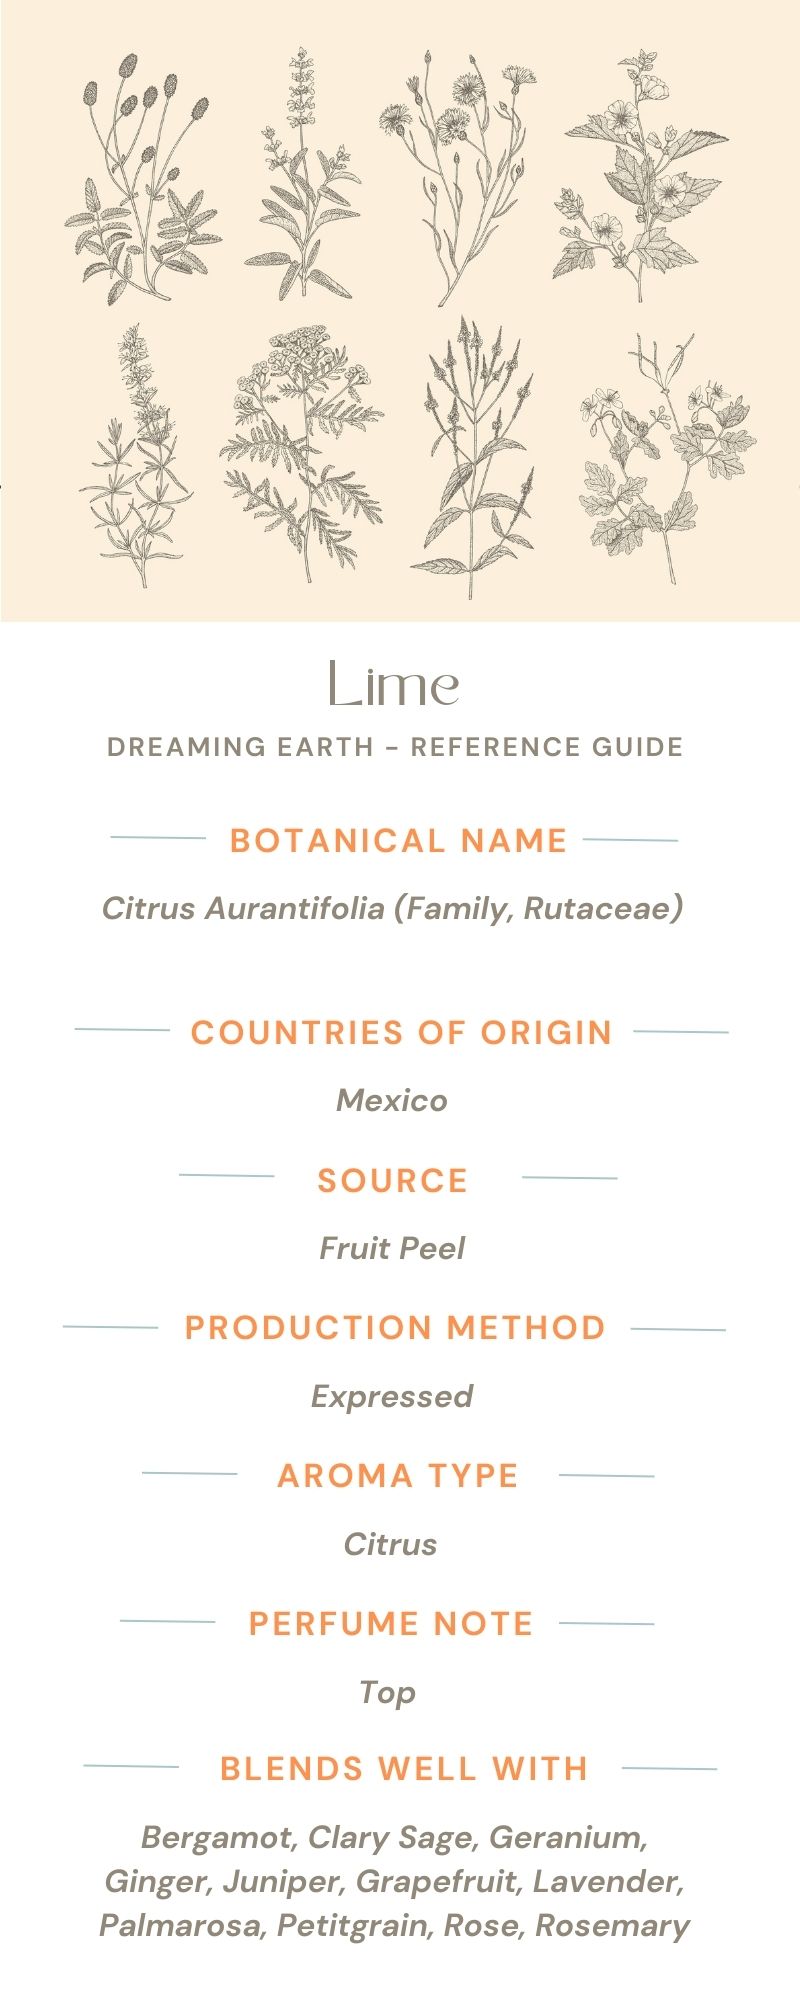 Load image into Gallery viewer, Lime Organic Essential Oil - Dreaming Earth Inc
